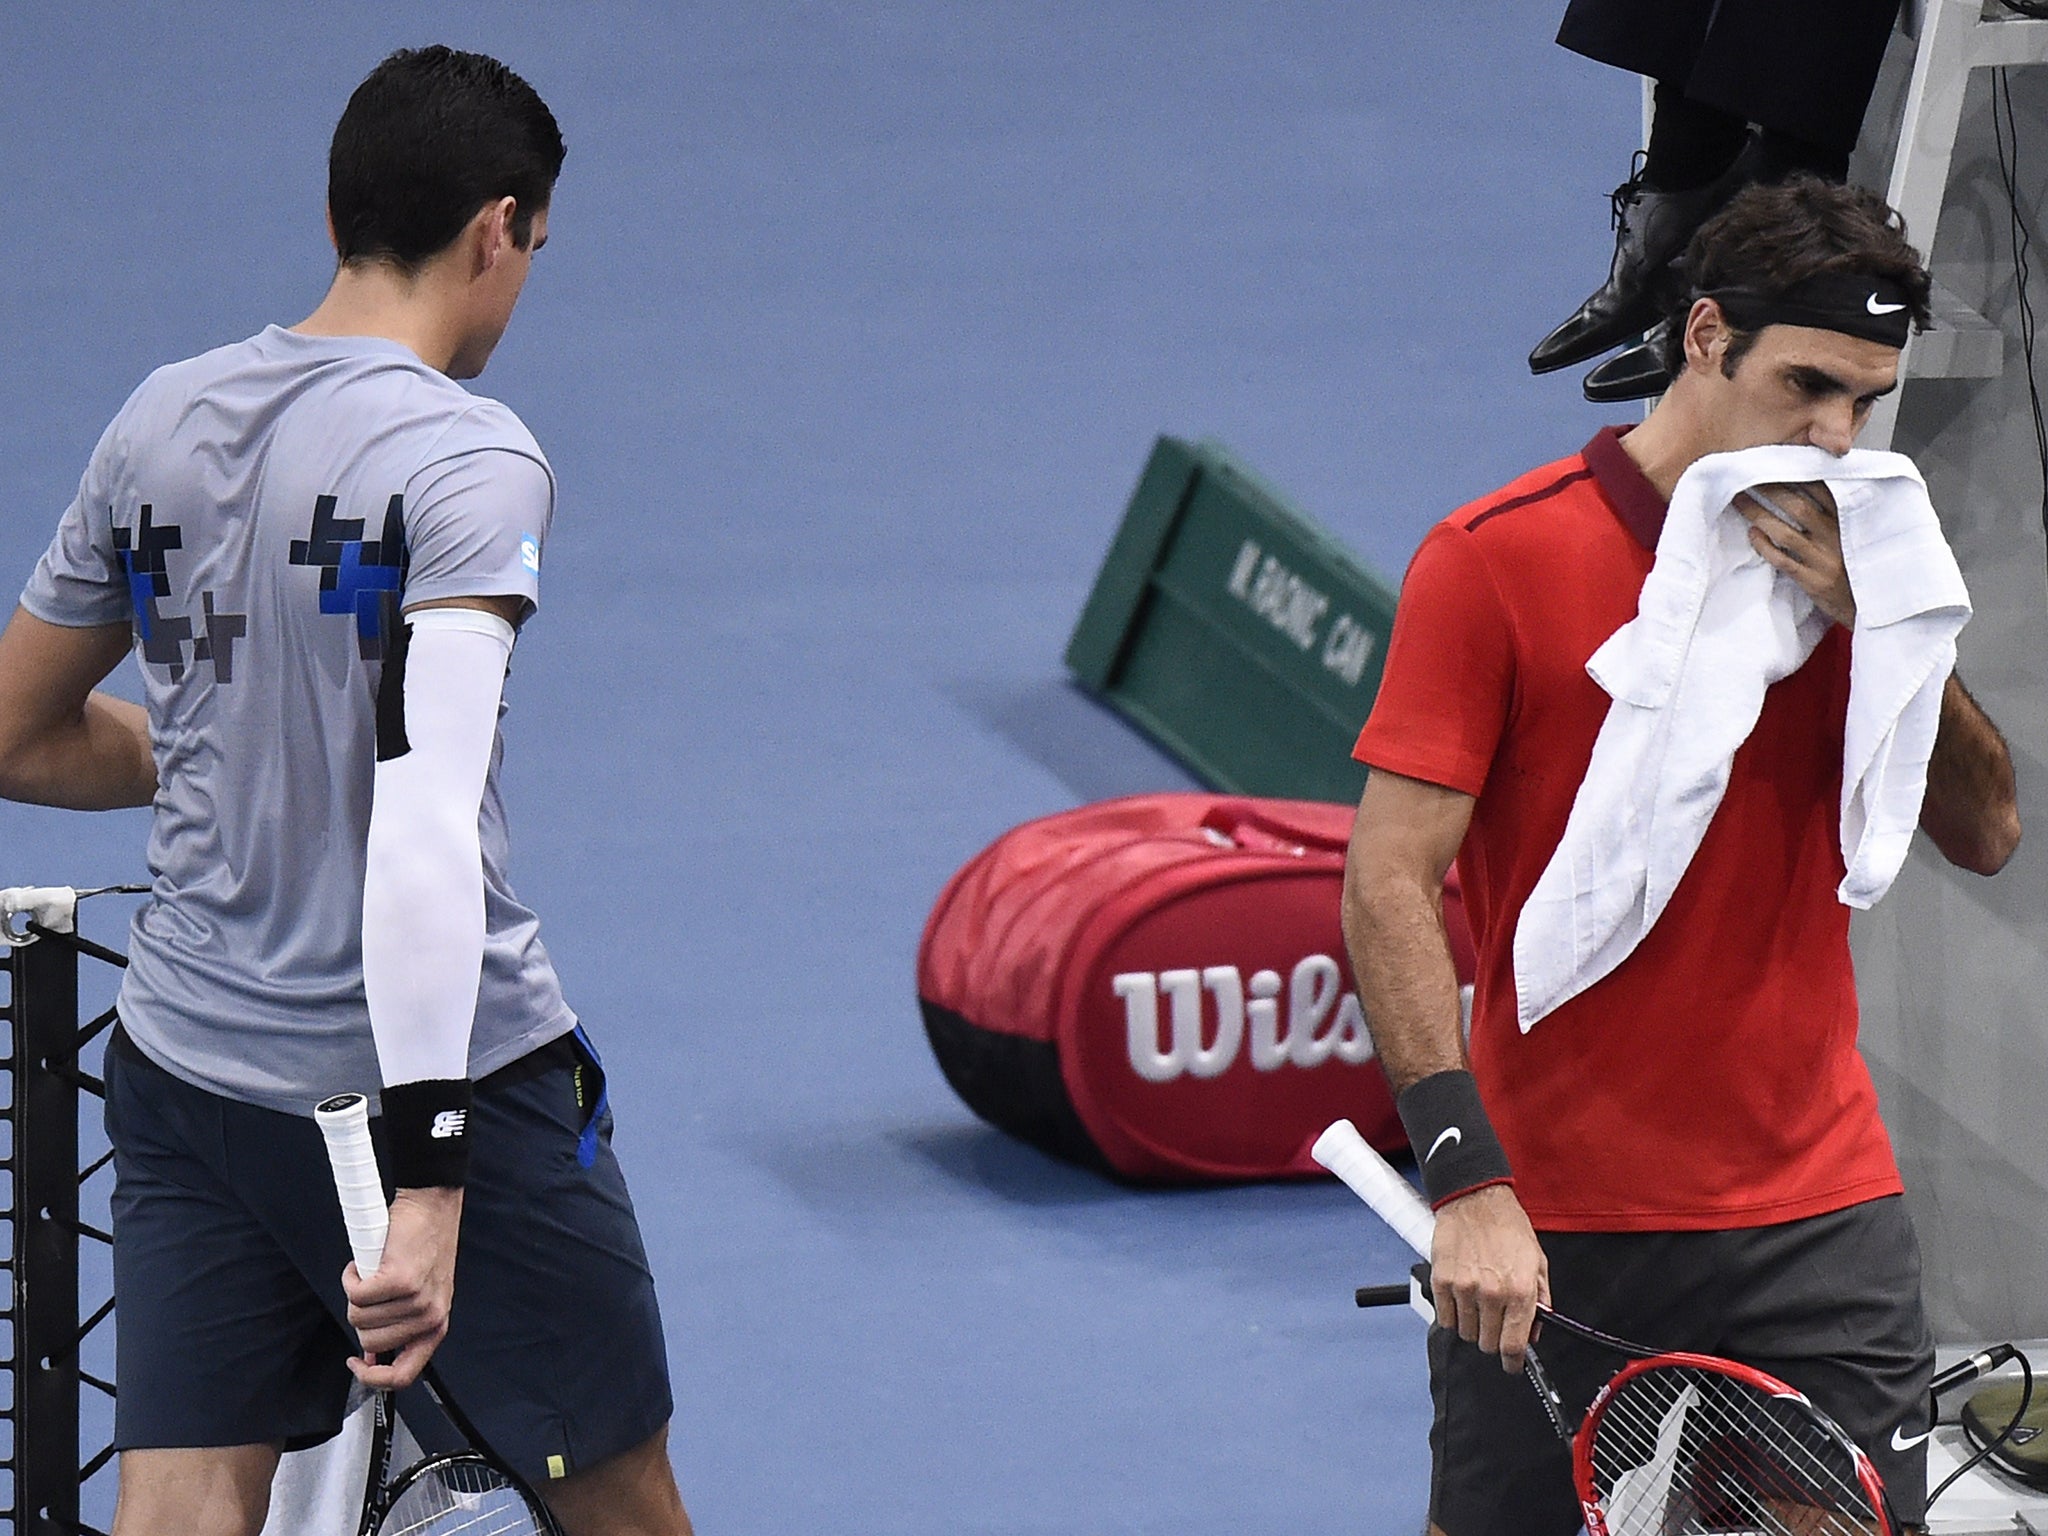 Switzerland's Roger Federer (R) walks to his seat after loosing the first set against Canada's Milos Raonic